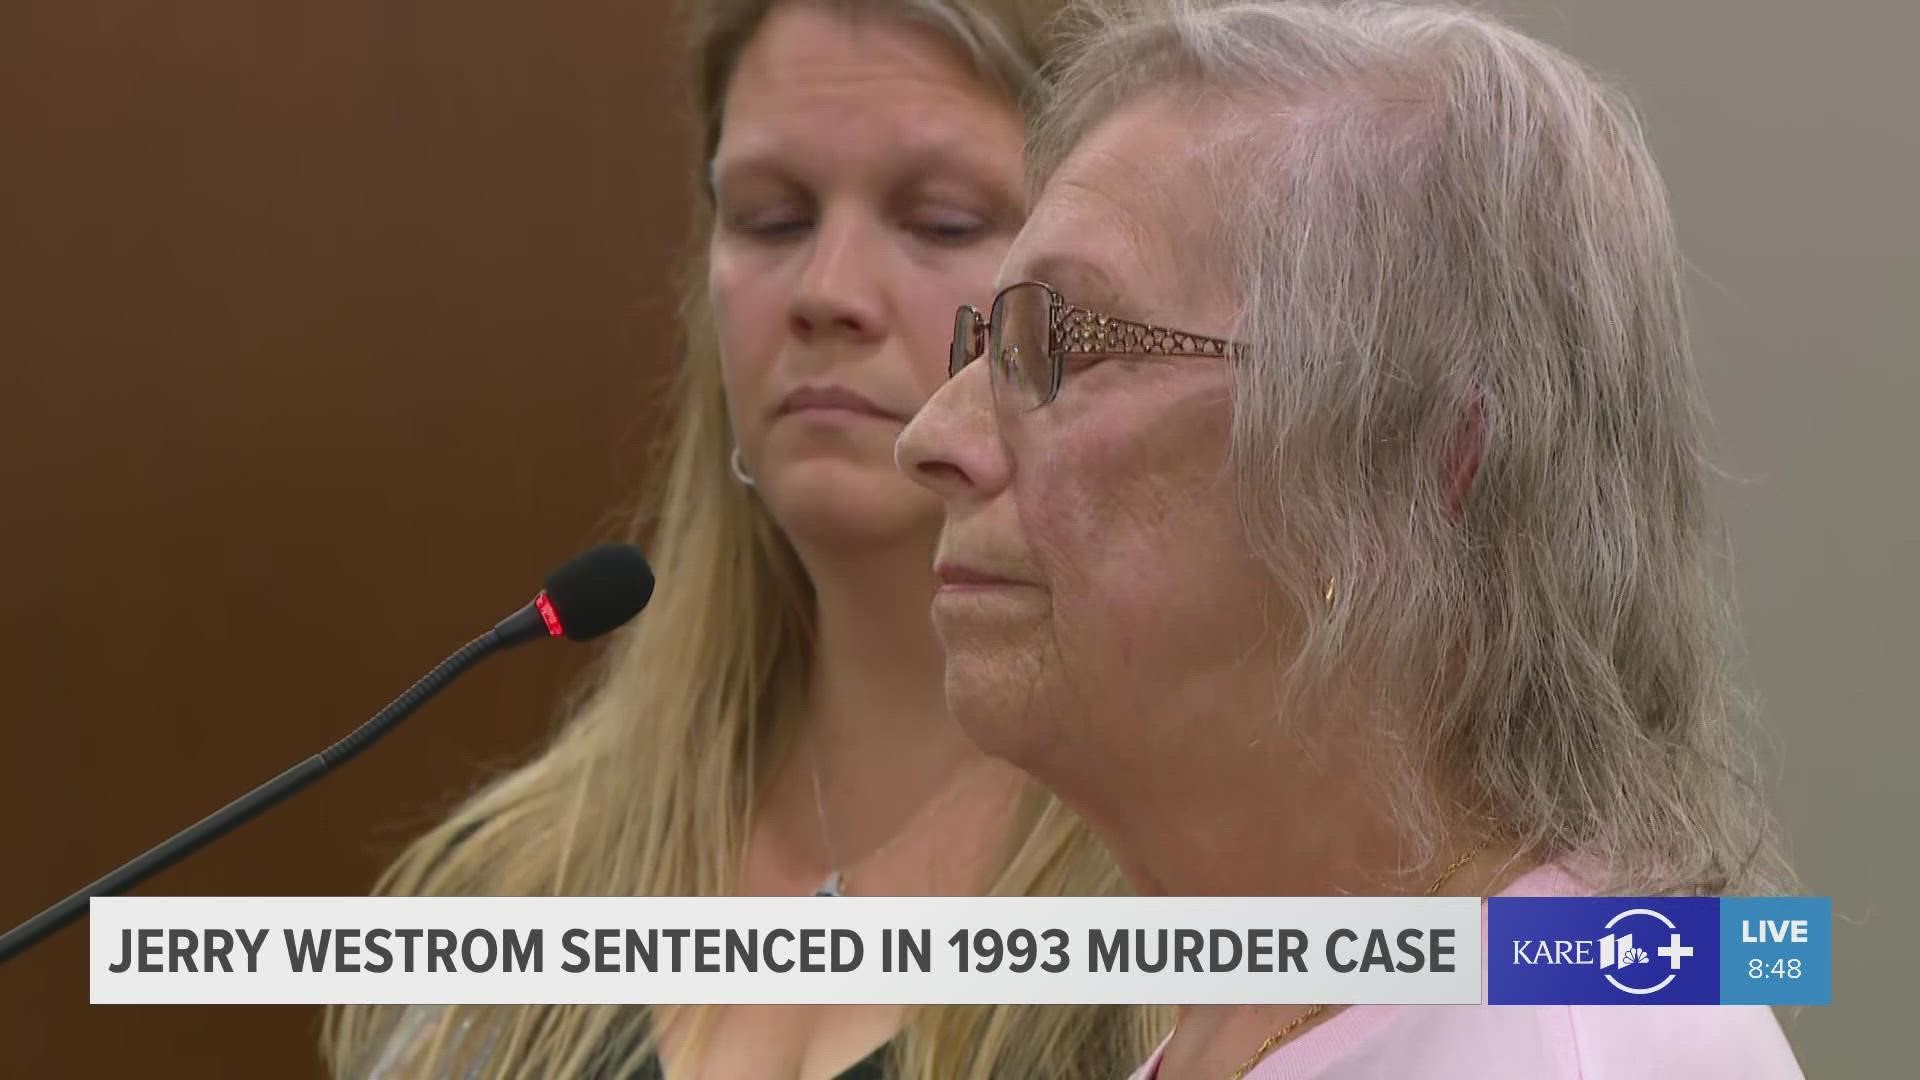 The mother, niece and sister of Jeanie Childs made impact statements in court Friday before the man who killed her, Jerry Westrom, received a life sentence.